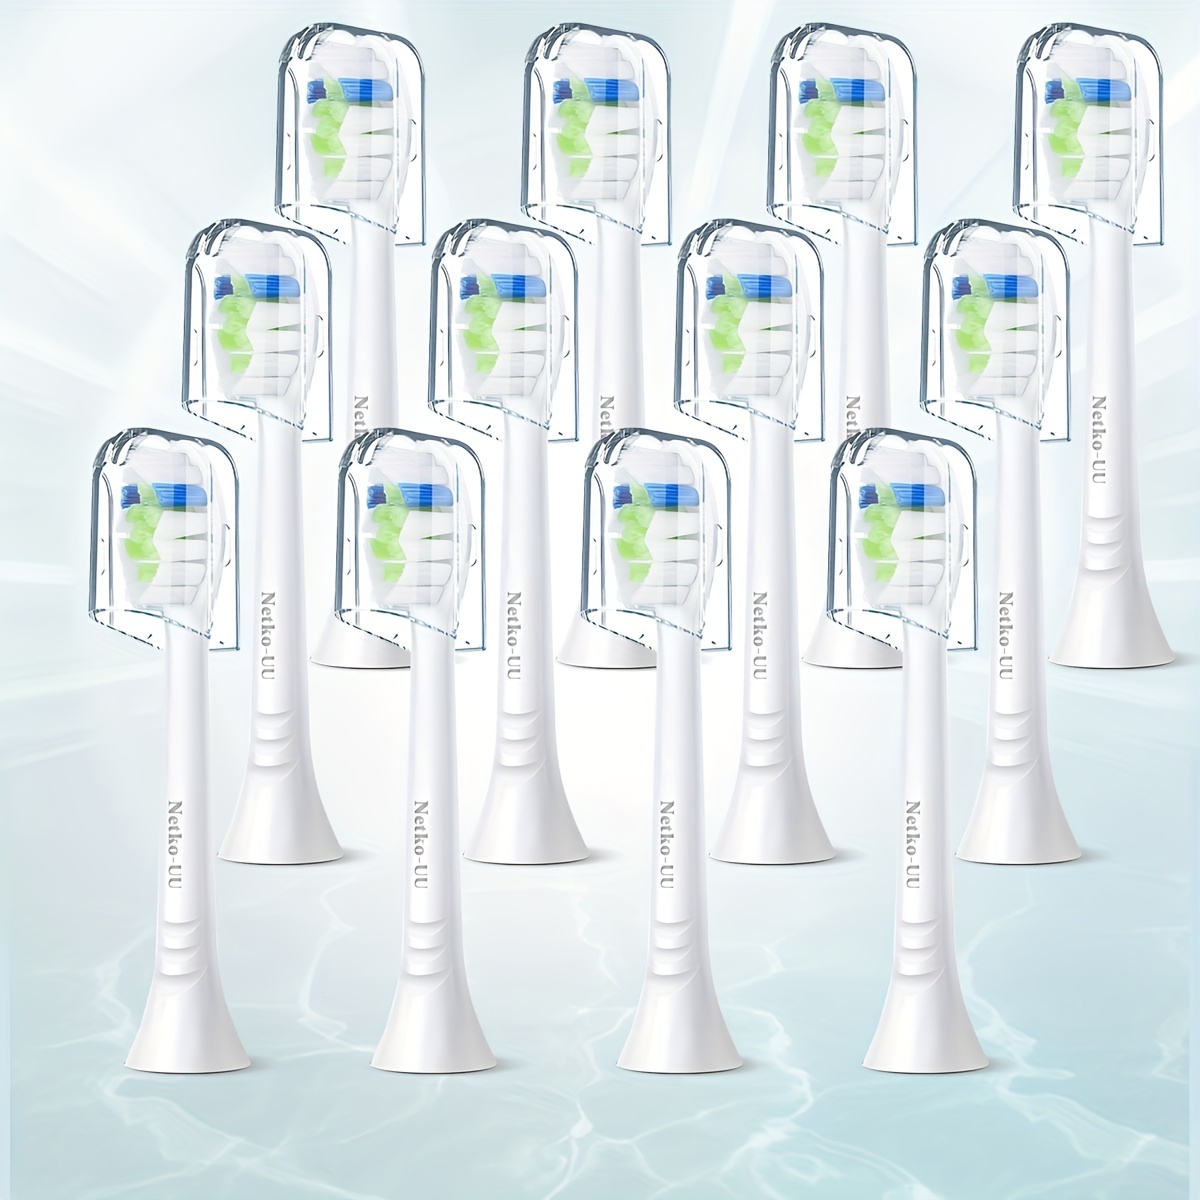 

Upgrade Your Smile With Philips Sonicare Compatible Replacement Toothbrush Heads